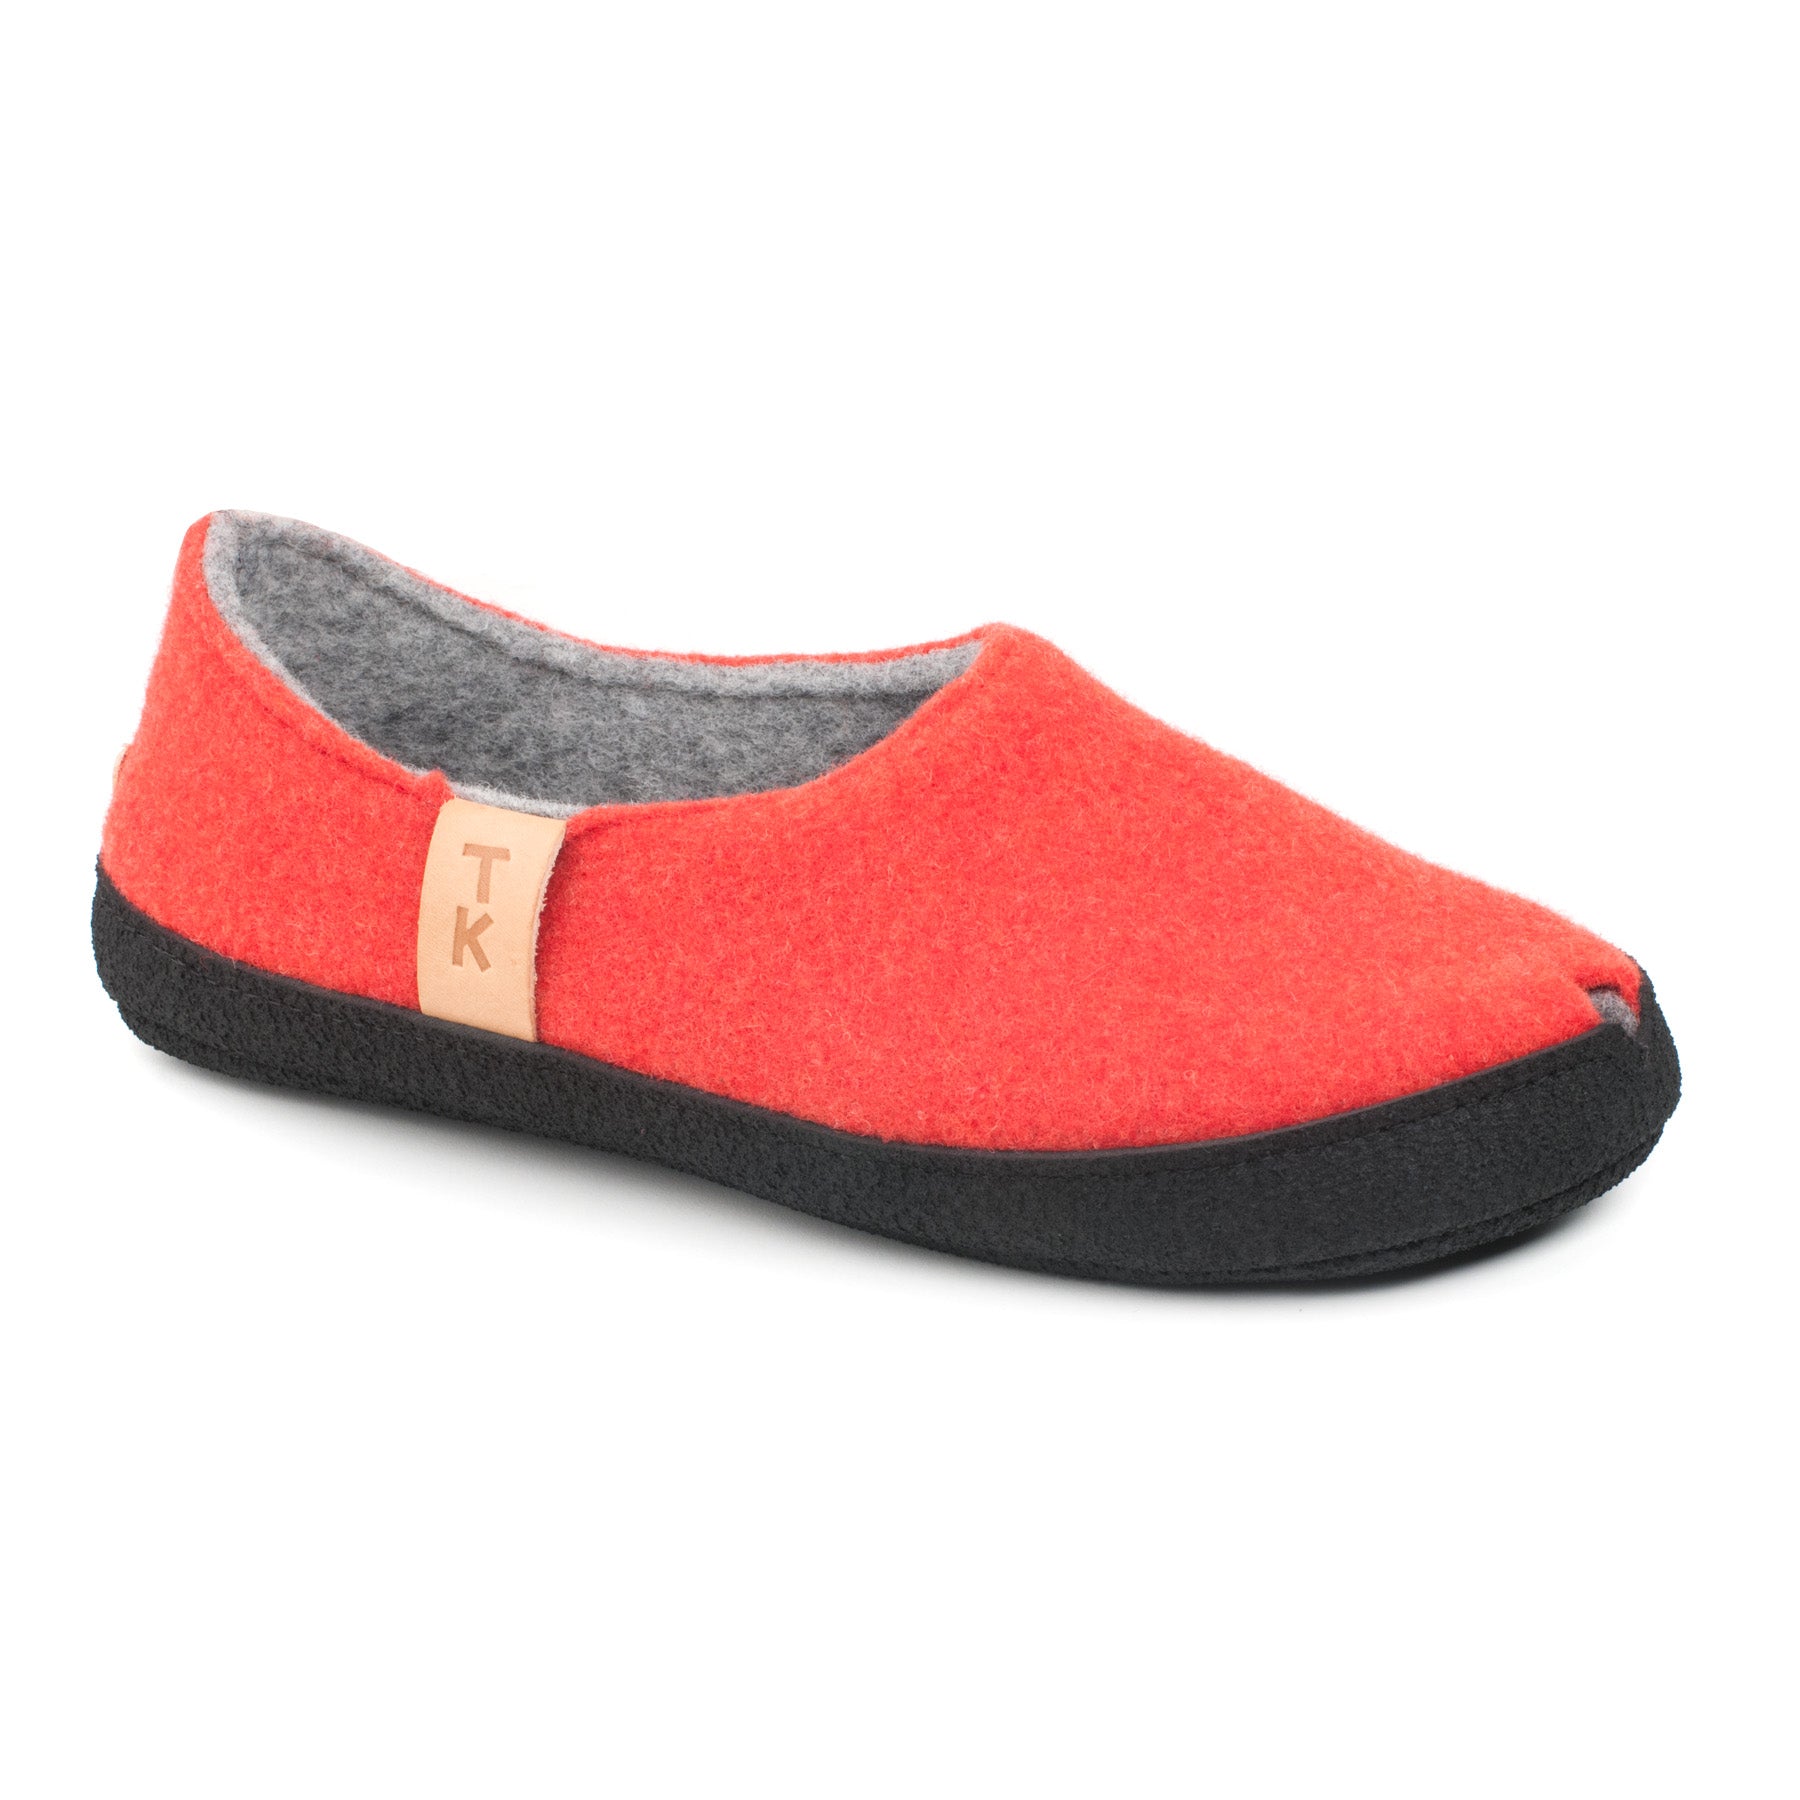 Woolen slippers Budapest, Limited Eddition